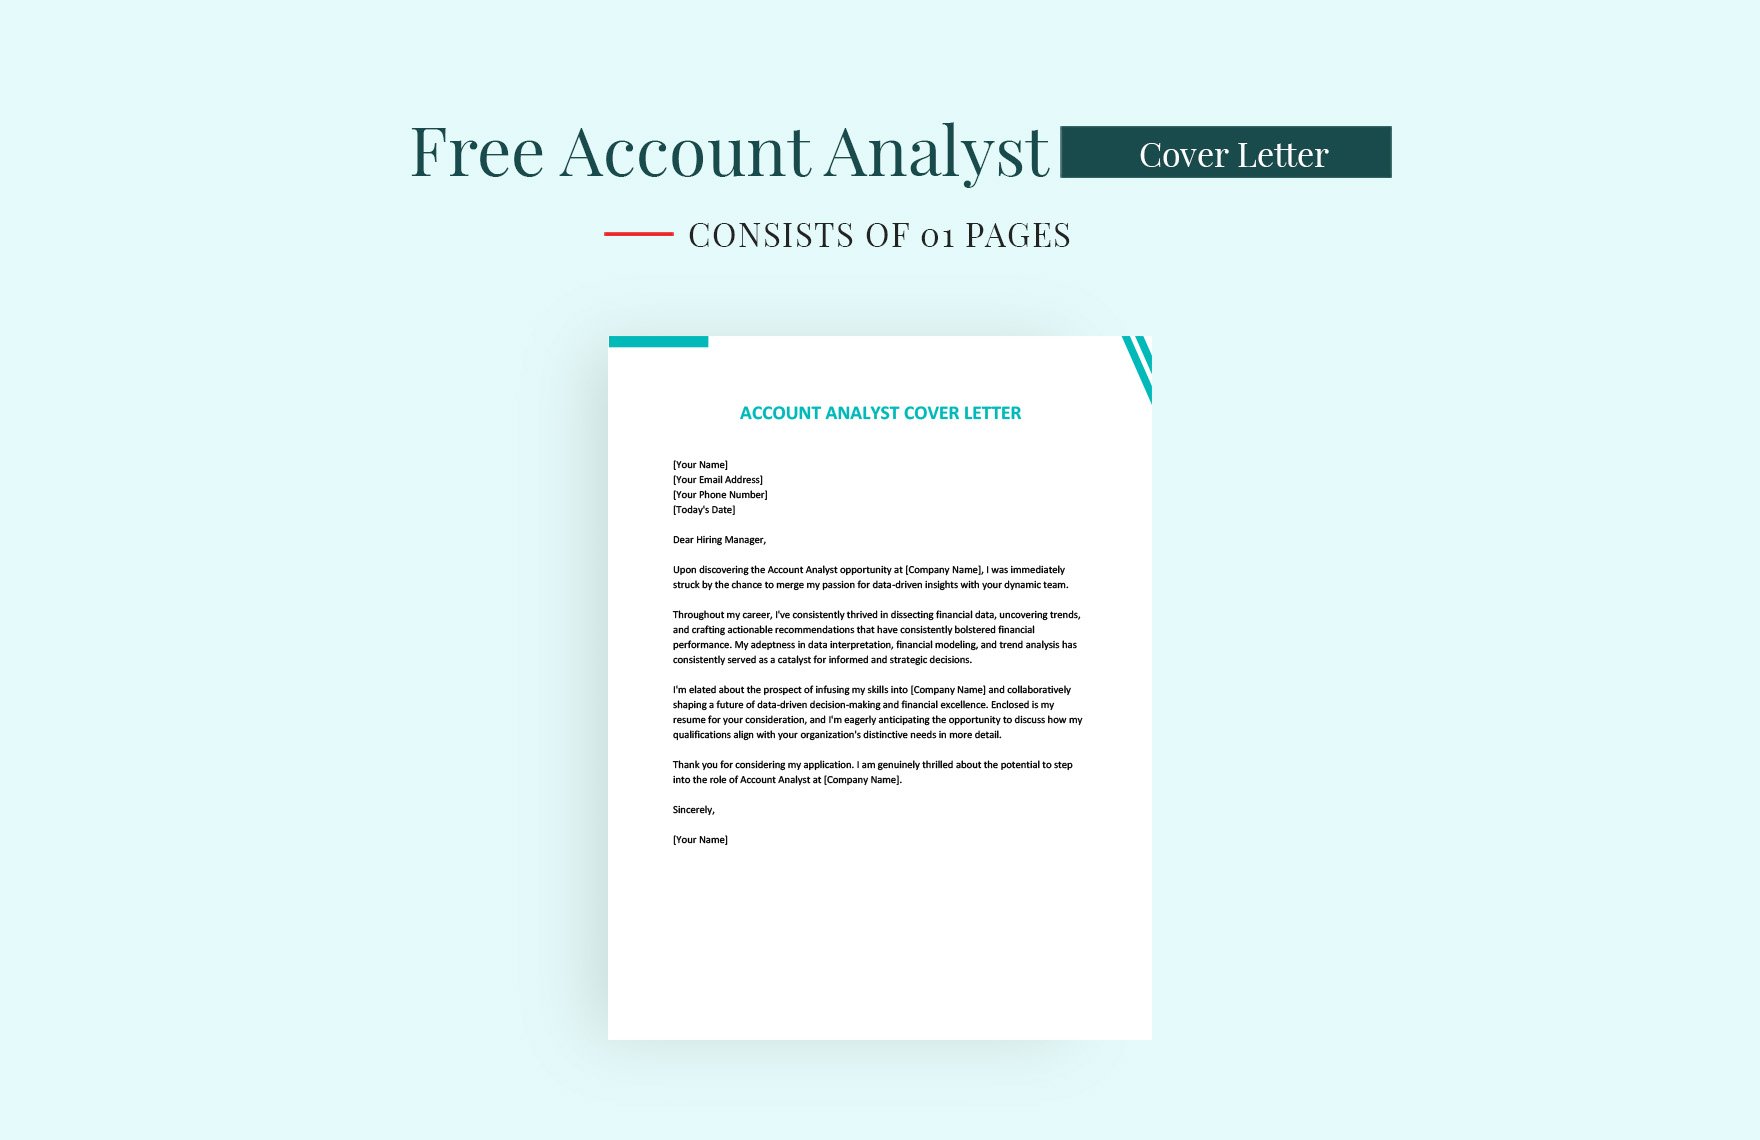 Account Analyst Cover Letter